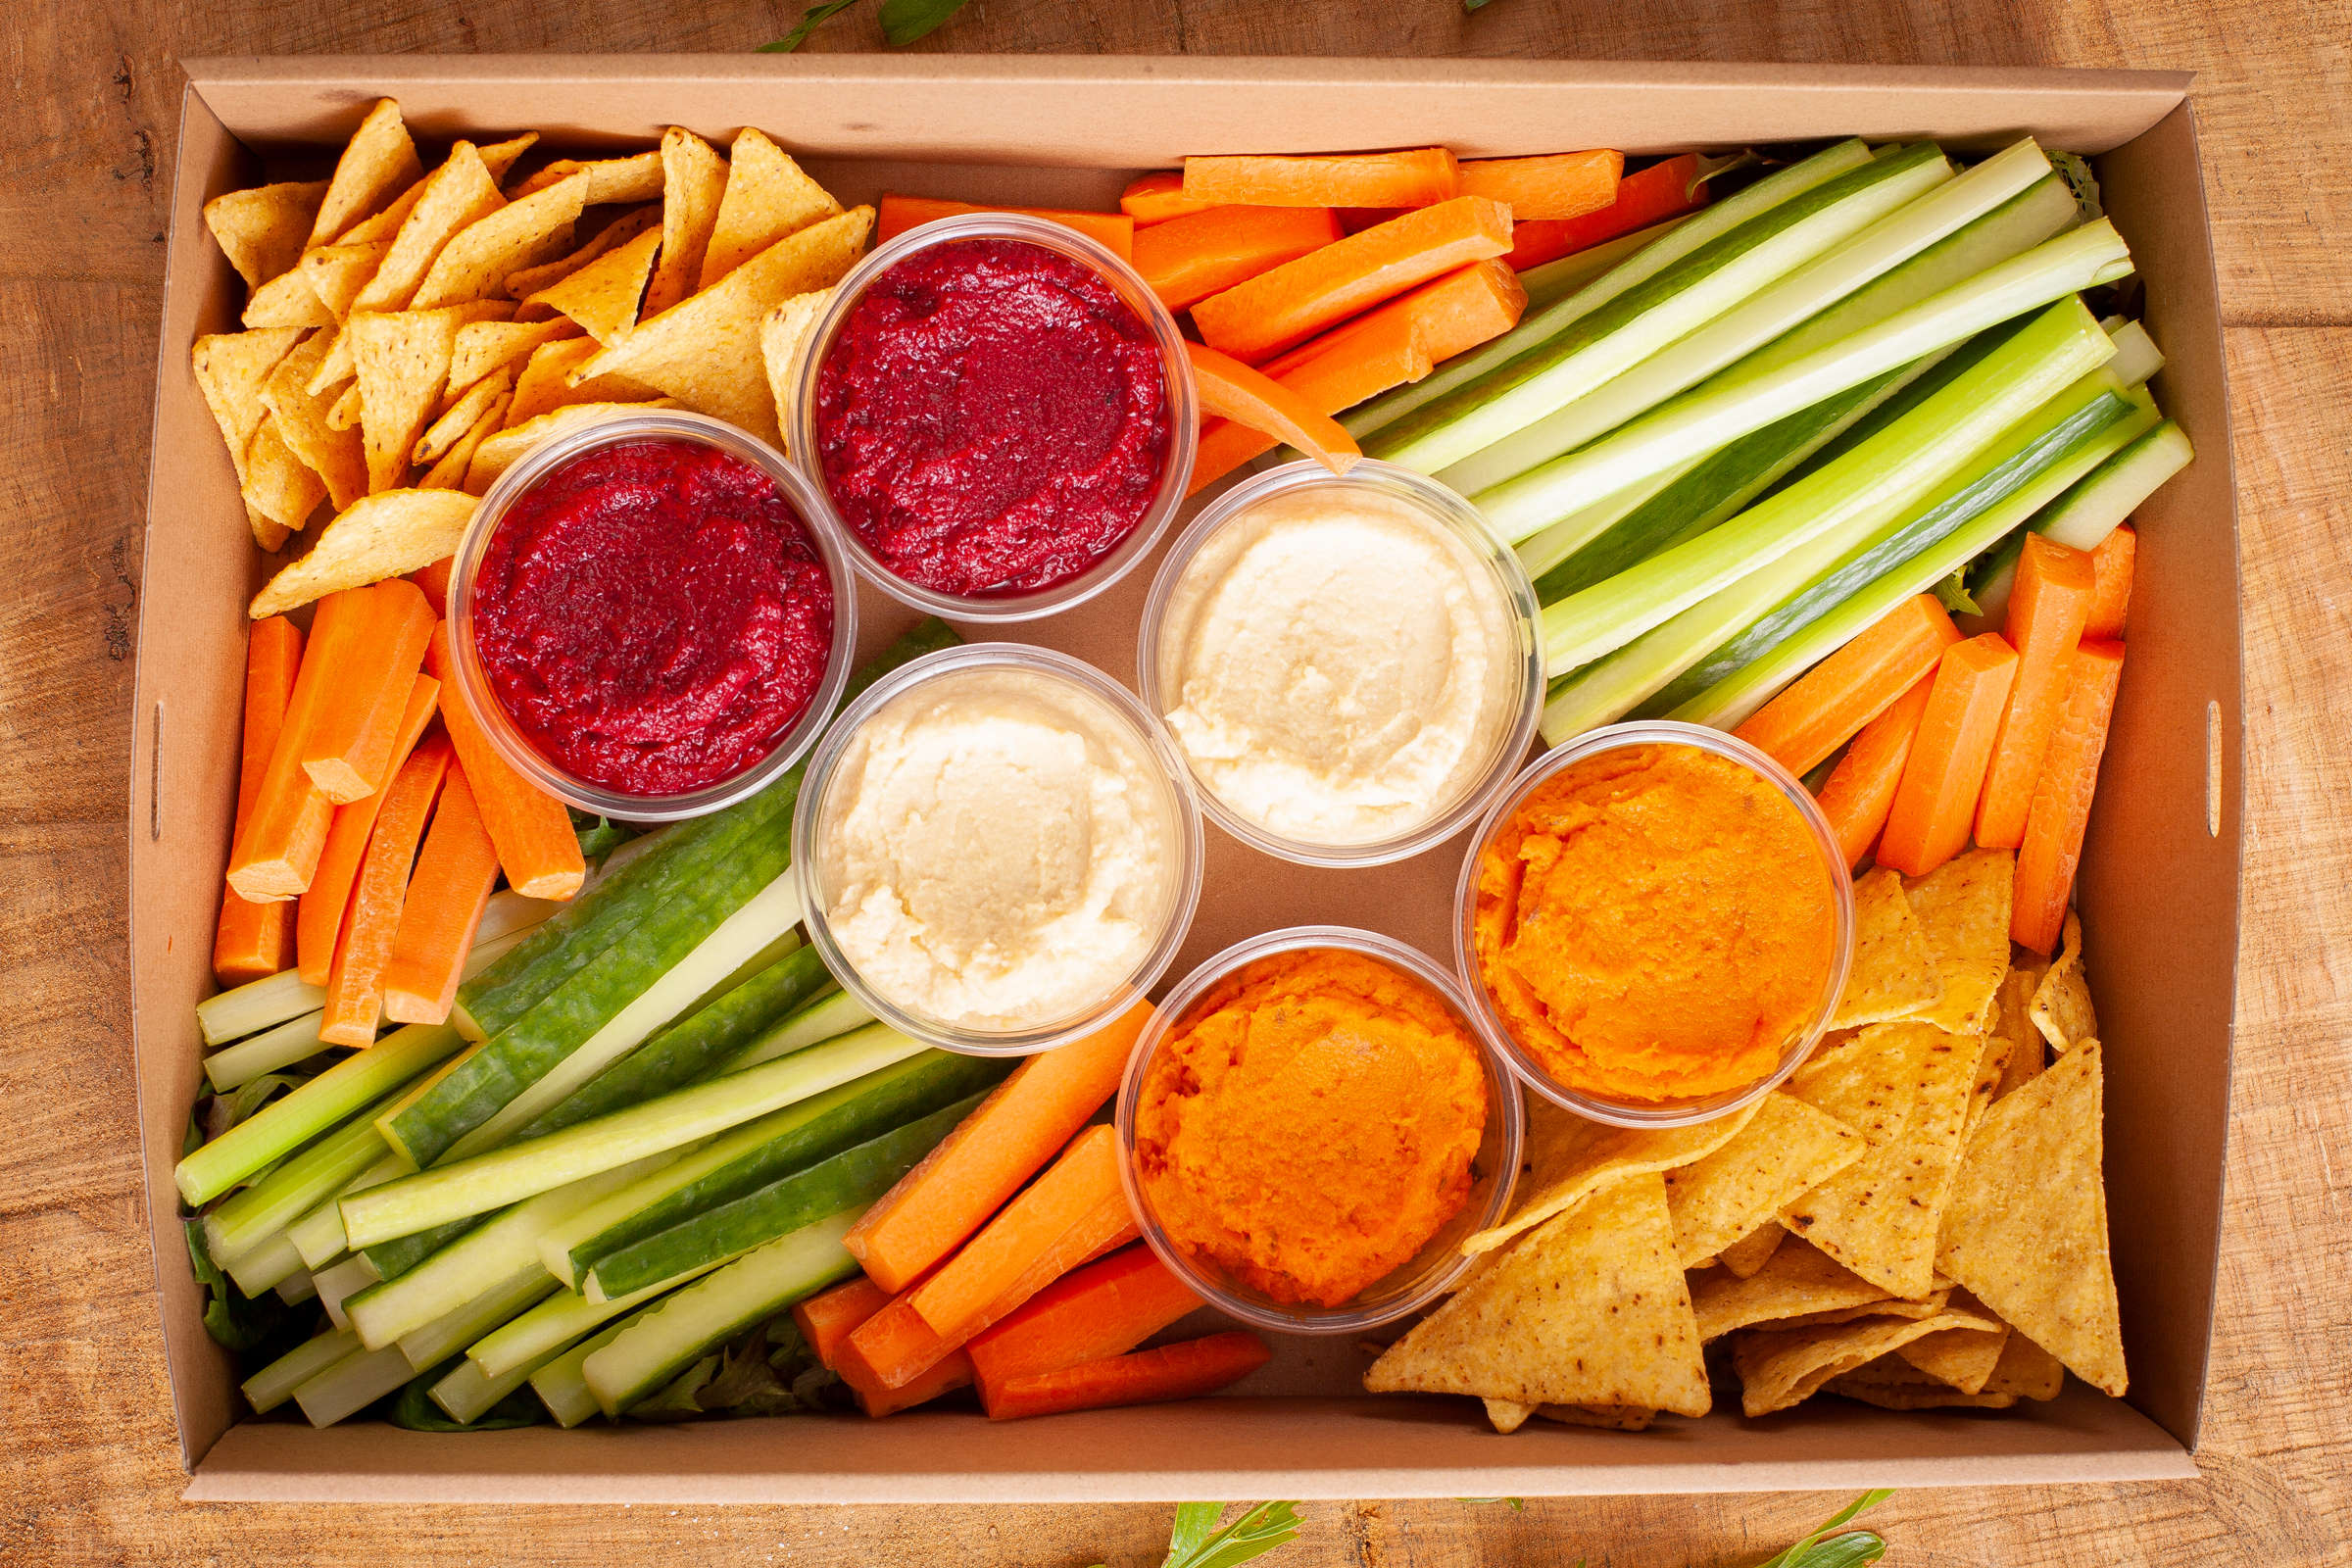 Dip and crudite catering box. Box pictured includes corn chips, carrot sticks, cucumber sticks, hummus, beetroot dip, and pumpkin and feta dips. Credit: Richard Jupe.